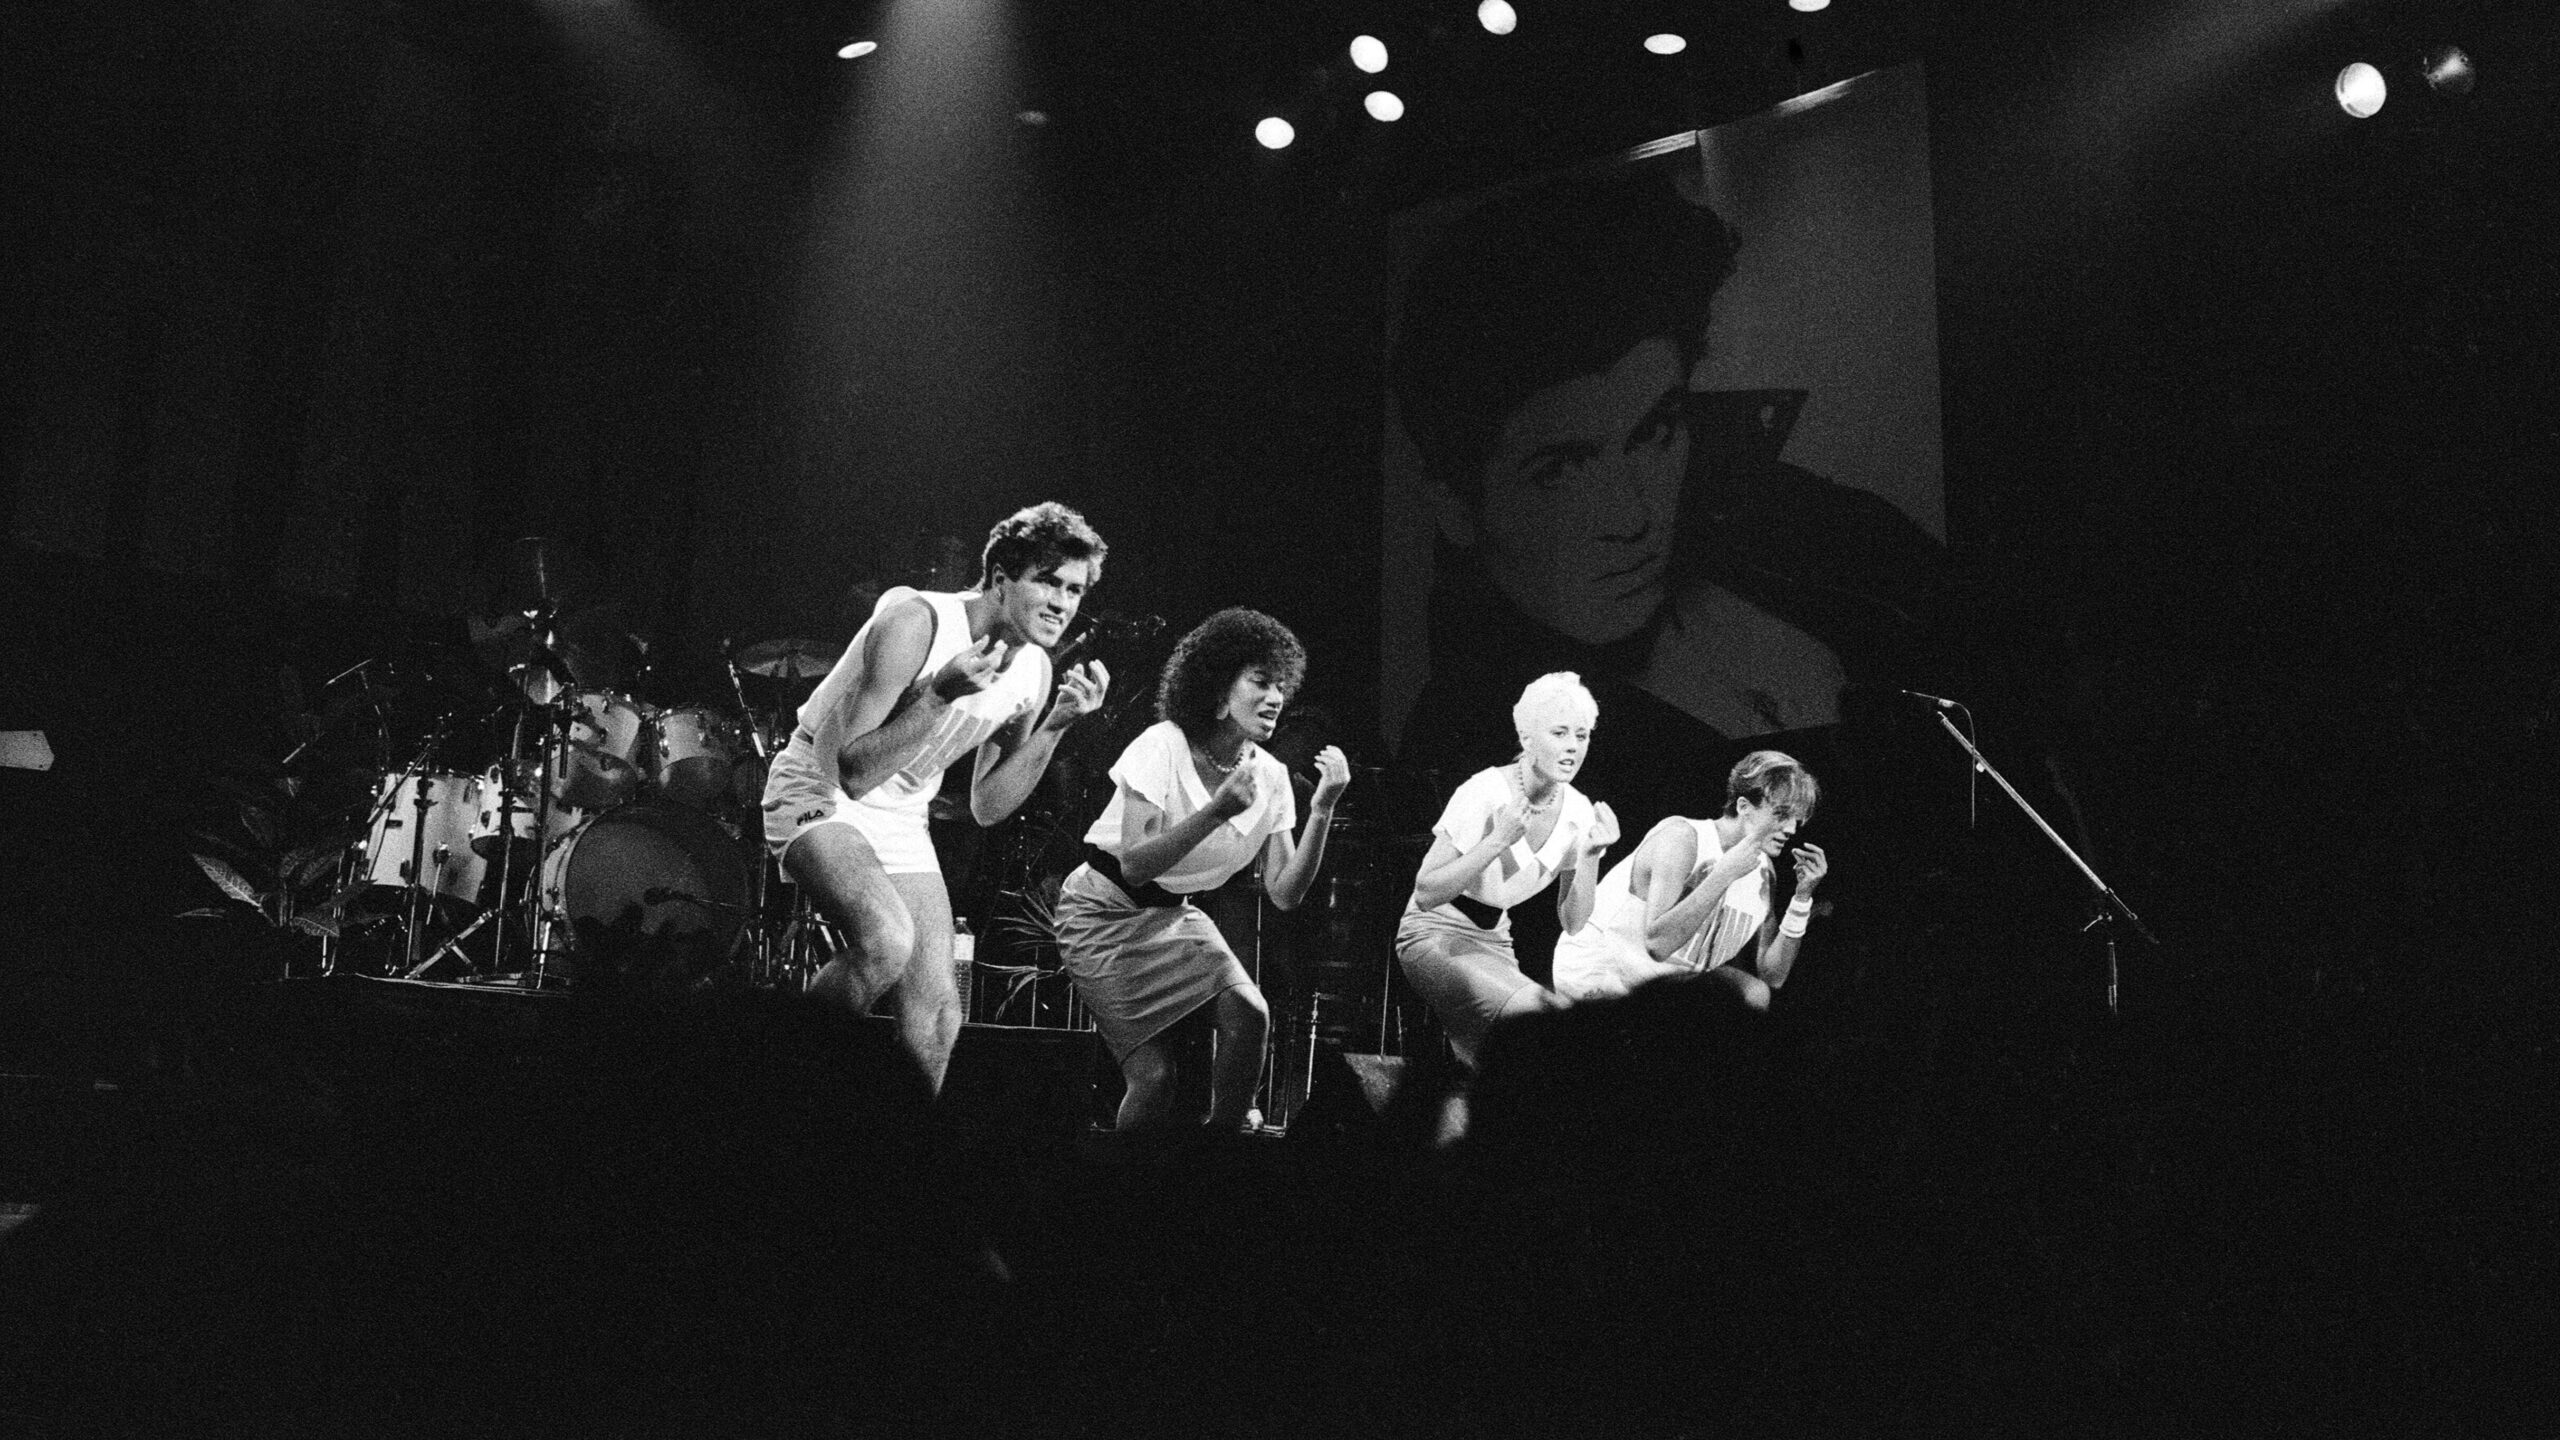 Wham! onstage in 1983